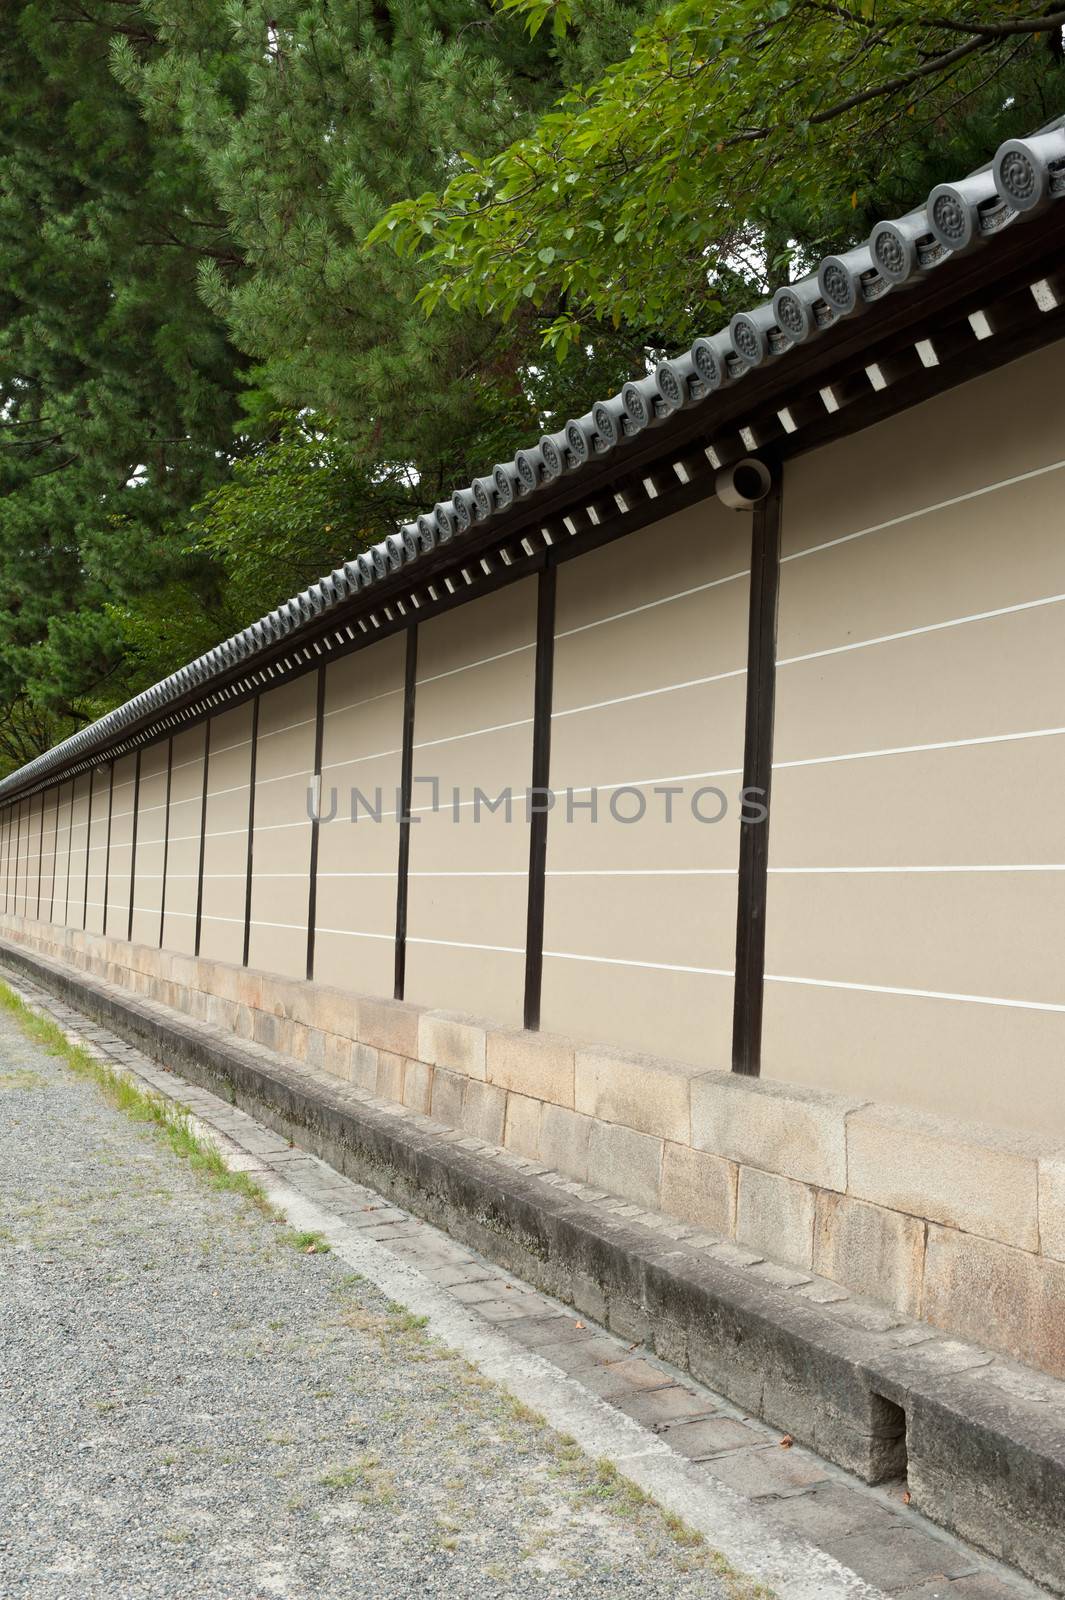 Wal of the imperial palace in Kyoto, Japan